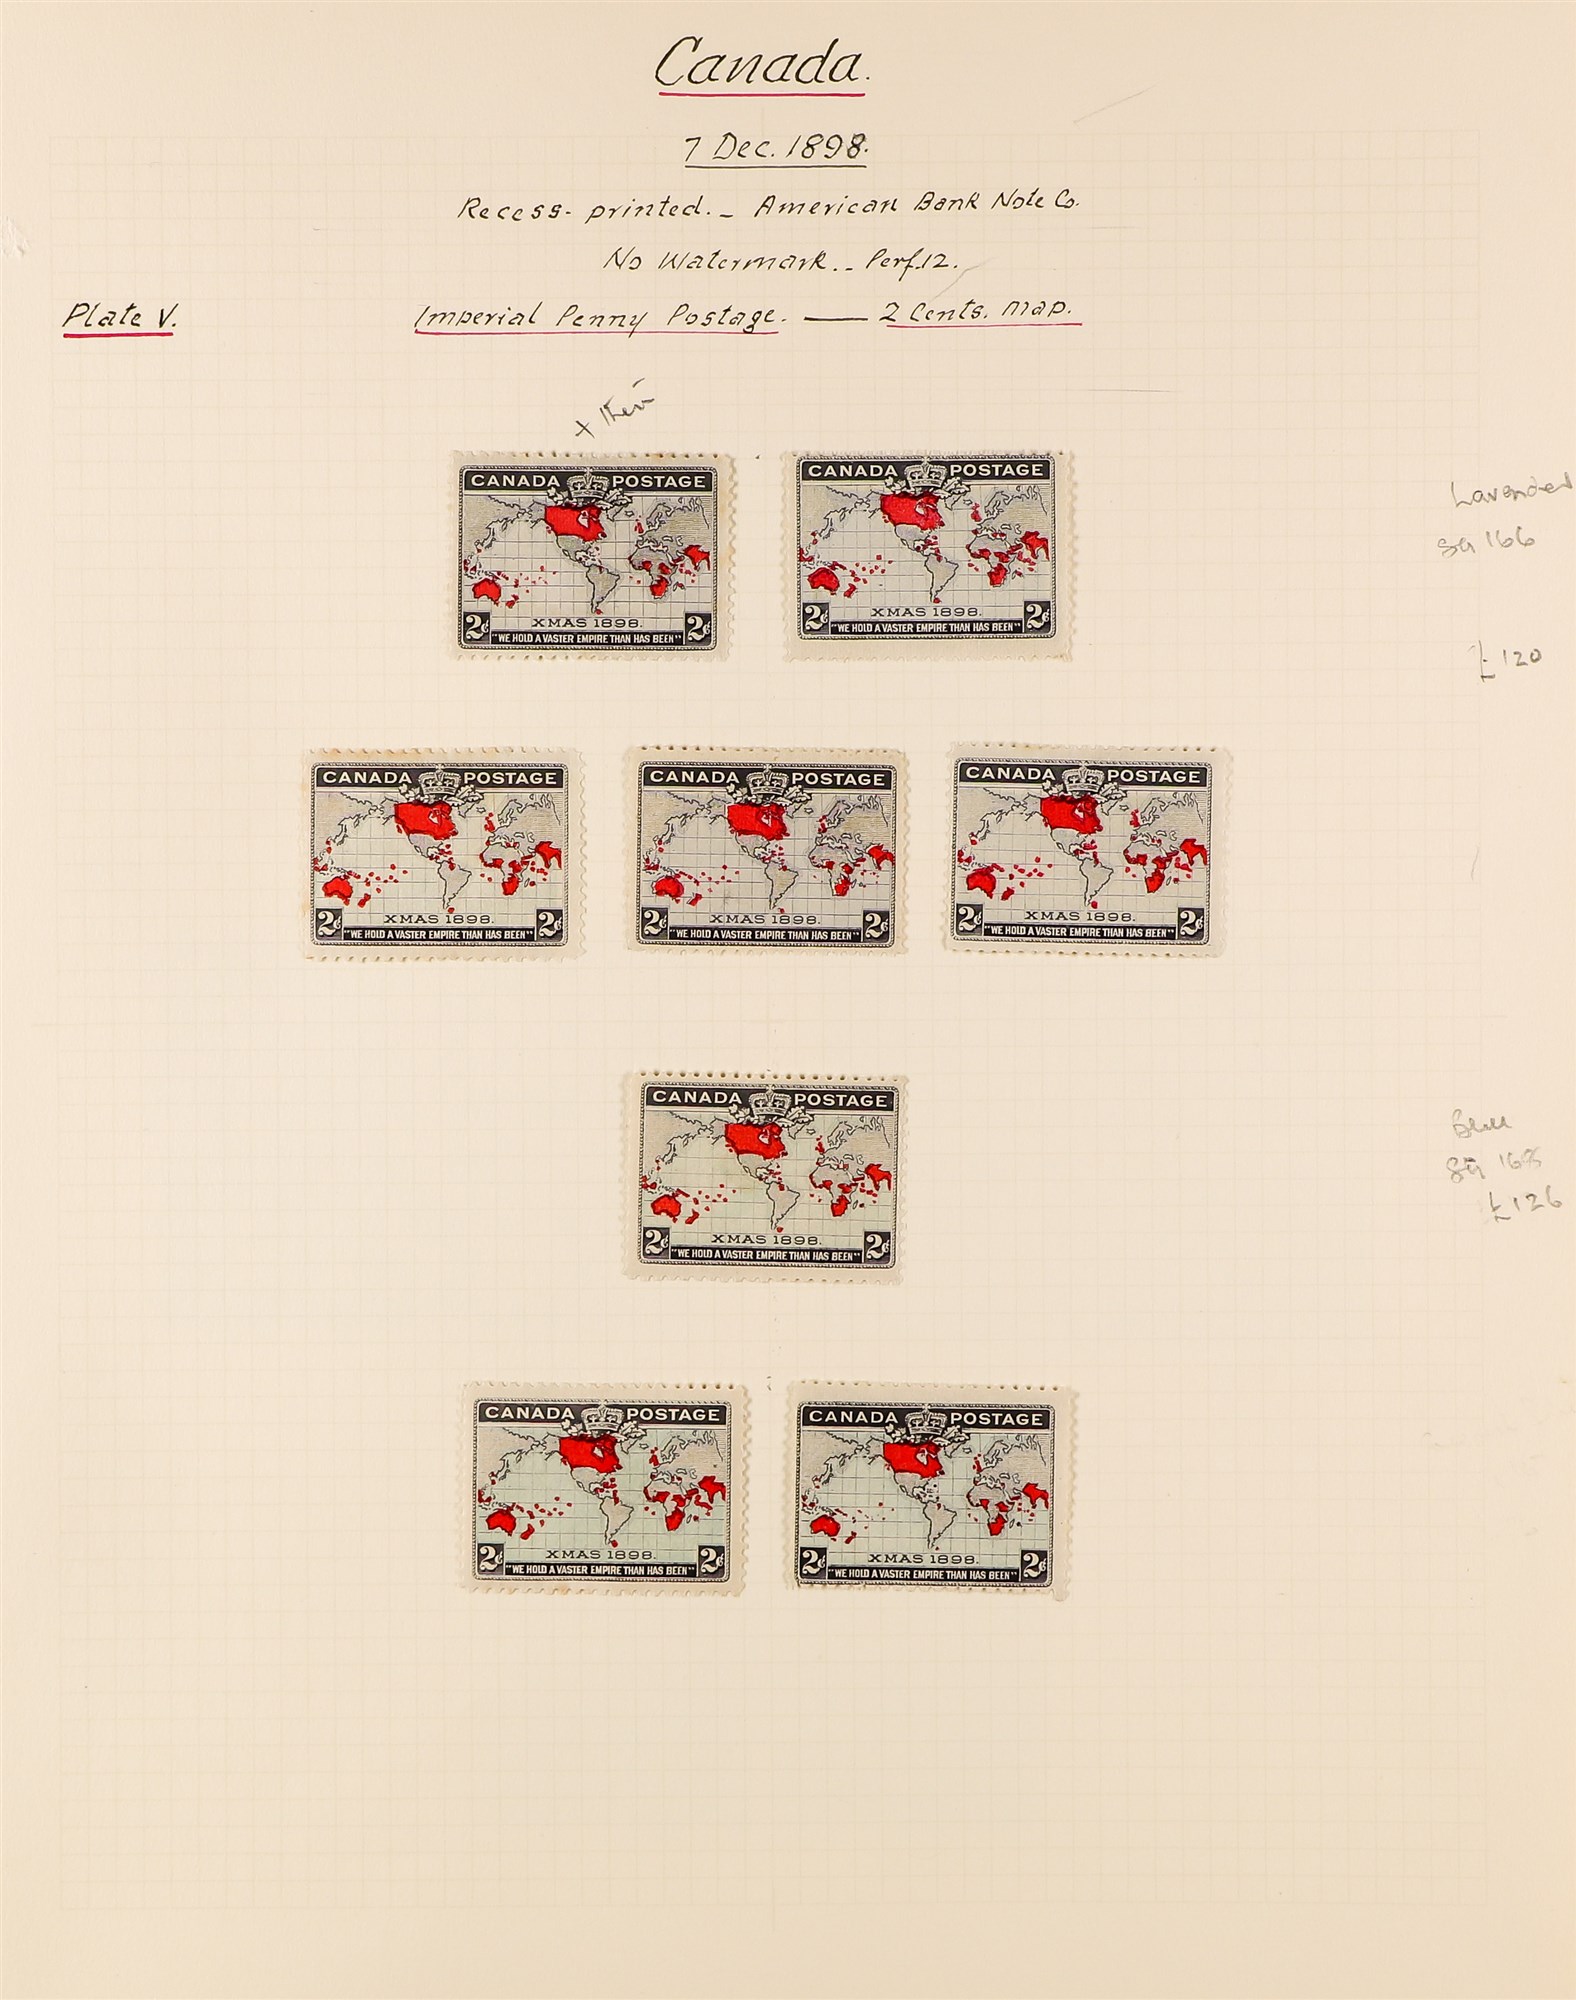 CANADA 1898 IMPERIAL PENNY POSTAGE 2c Map specialized collection of mint stamps incl blocks 4, a